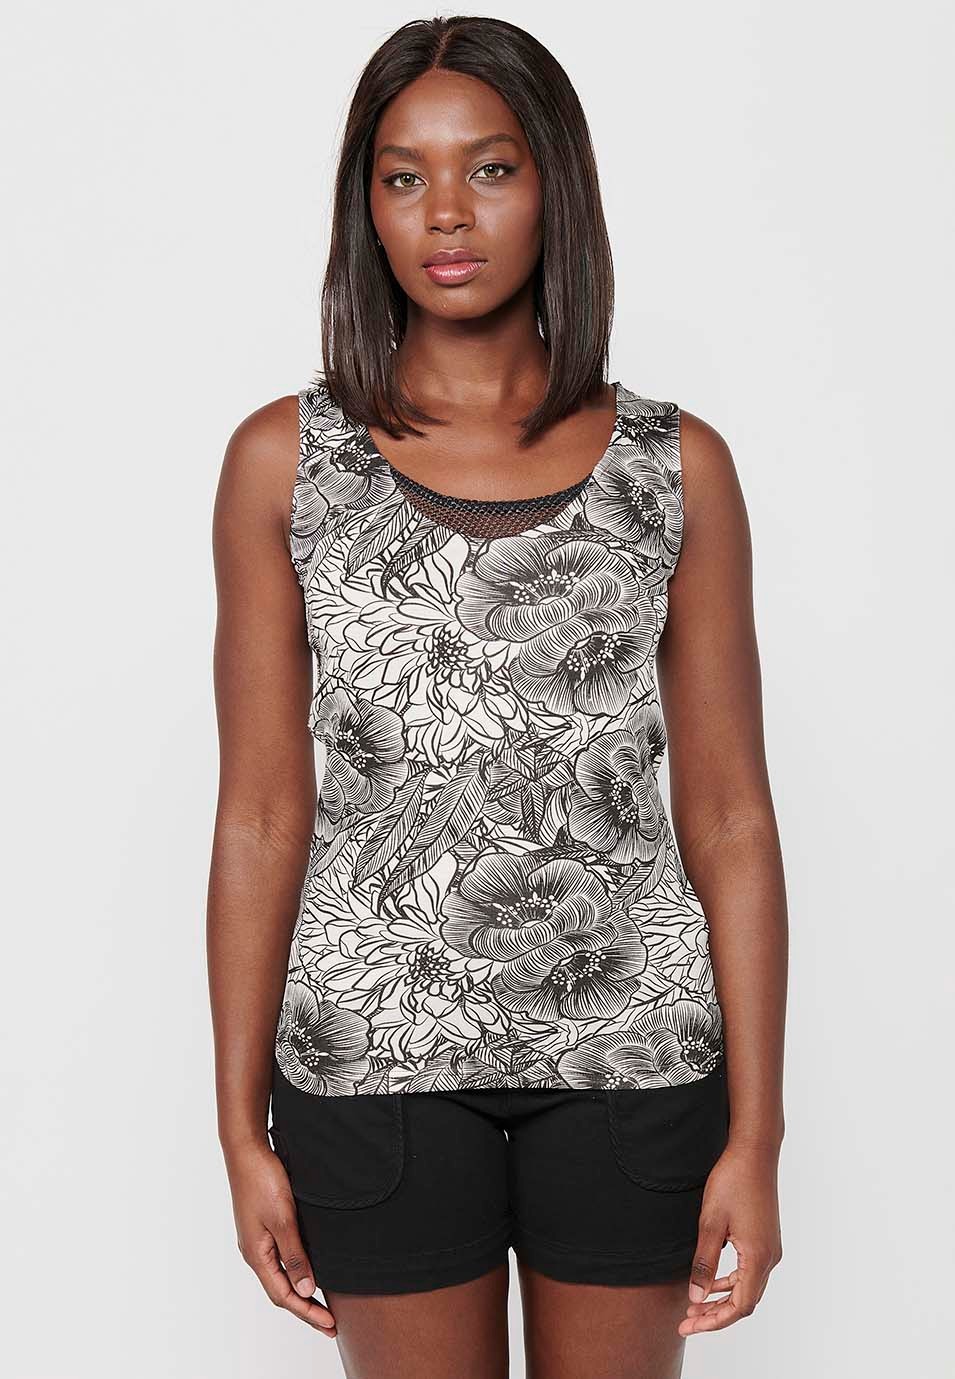 Sleeveless T-shirt with Round Neckline with Detail and White Floral Print for Women